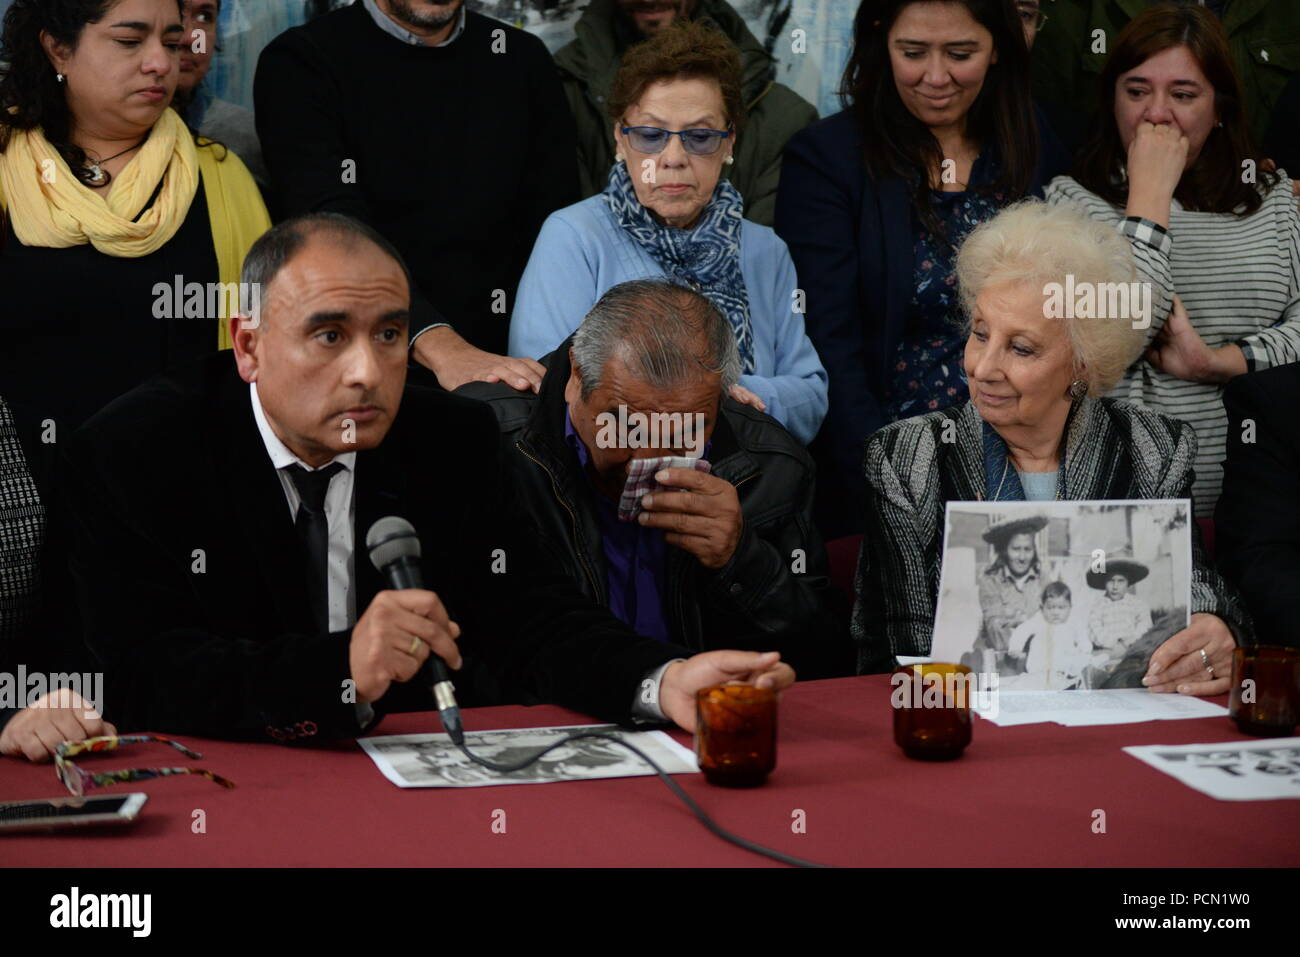 Buenos Aires, Argentina. 3rd Aug, 2018. Human Right organization Grandmothers of Plaza de Mayo at press conference announcing identity restitution of the 'Number 128 Grandson.' Marcos Ramos, was born in San Miguel de Tucuman and was kidnapped in 1976 along with his mother Rosario del Carmen Ramos and his older brother, Ismael. Today the brothers met again thanks to the work of Grandmothers of Plaza de Mayo. Credit: Julieta Ferrario/ZUMA Wire/Alamy Live News Stock Photo